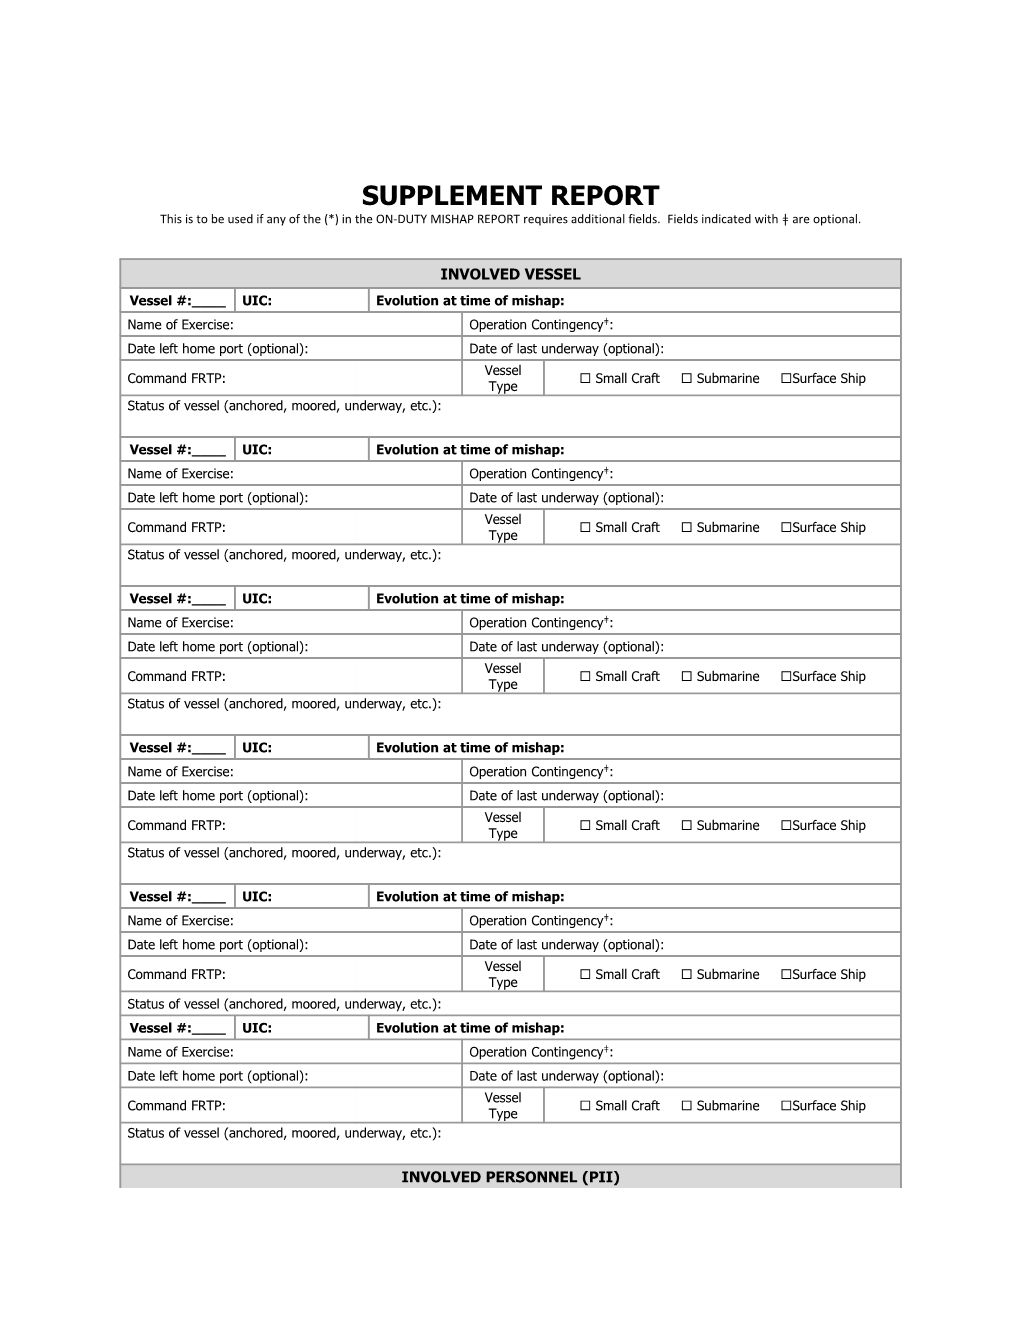 On-Duty Mishap Report Supplement